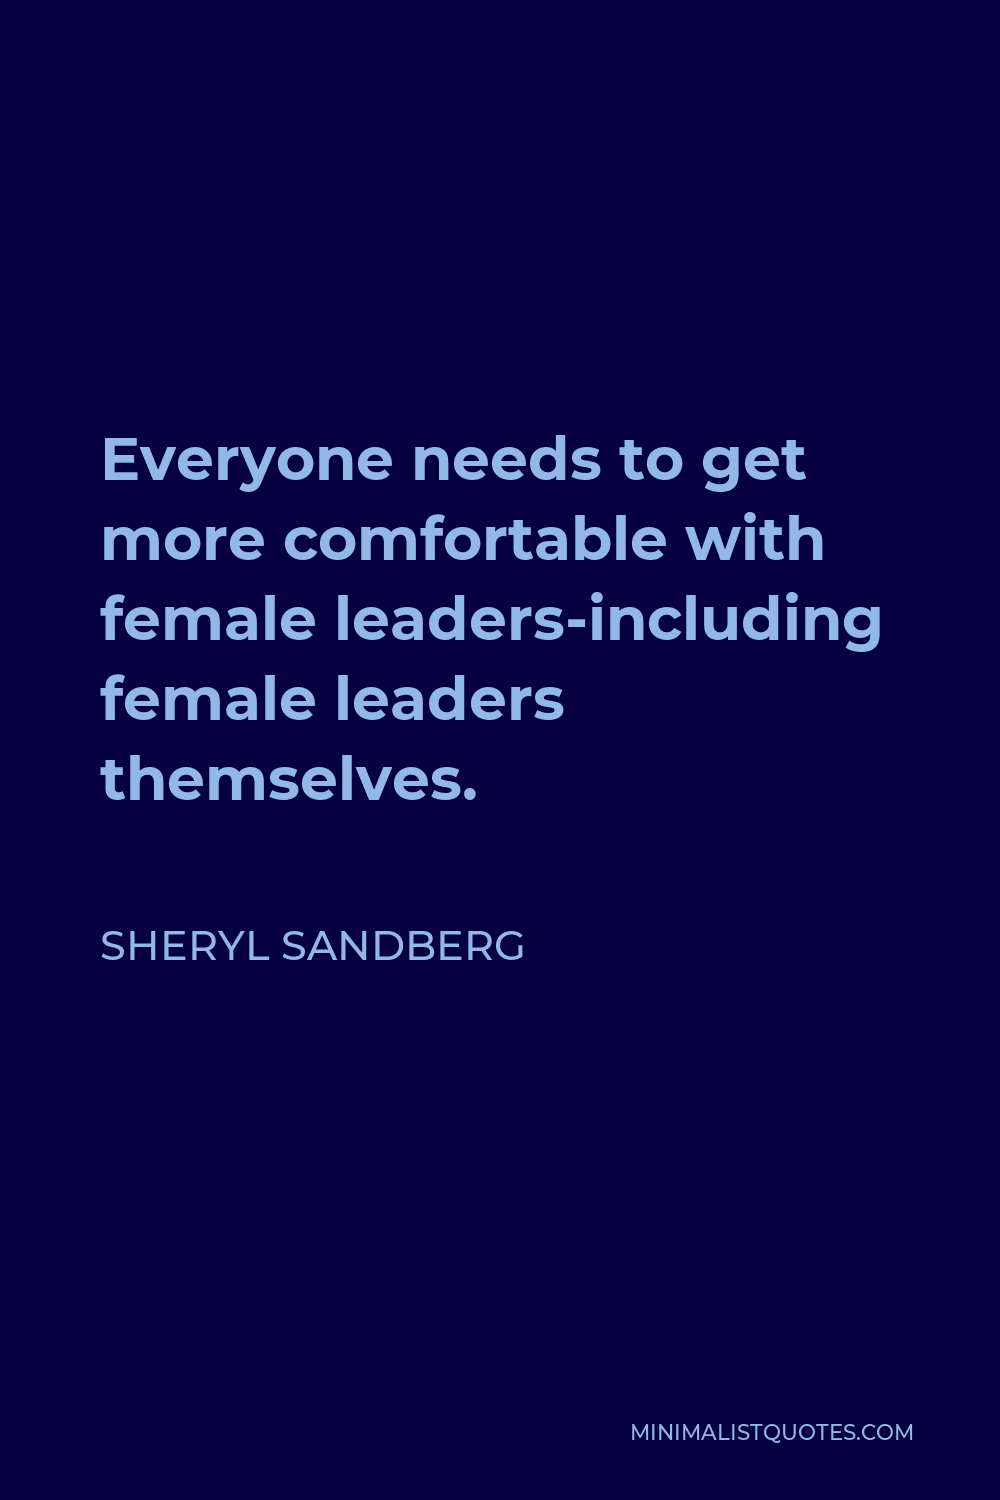 Sheryl Sandberg Quote - Everyone needs to get more comfortable with female leaders-including female leaders themselves.